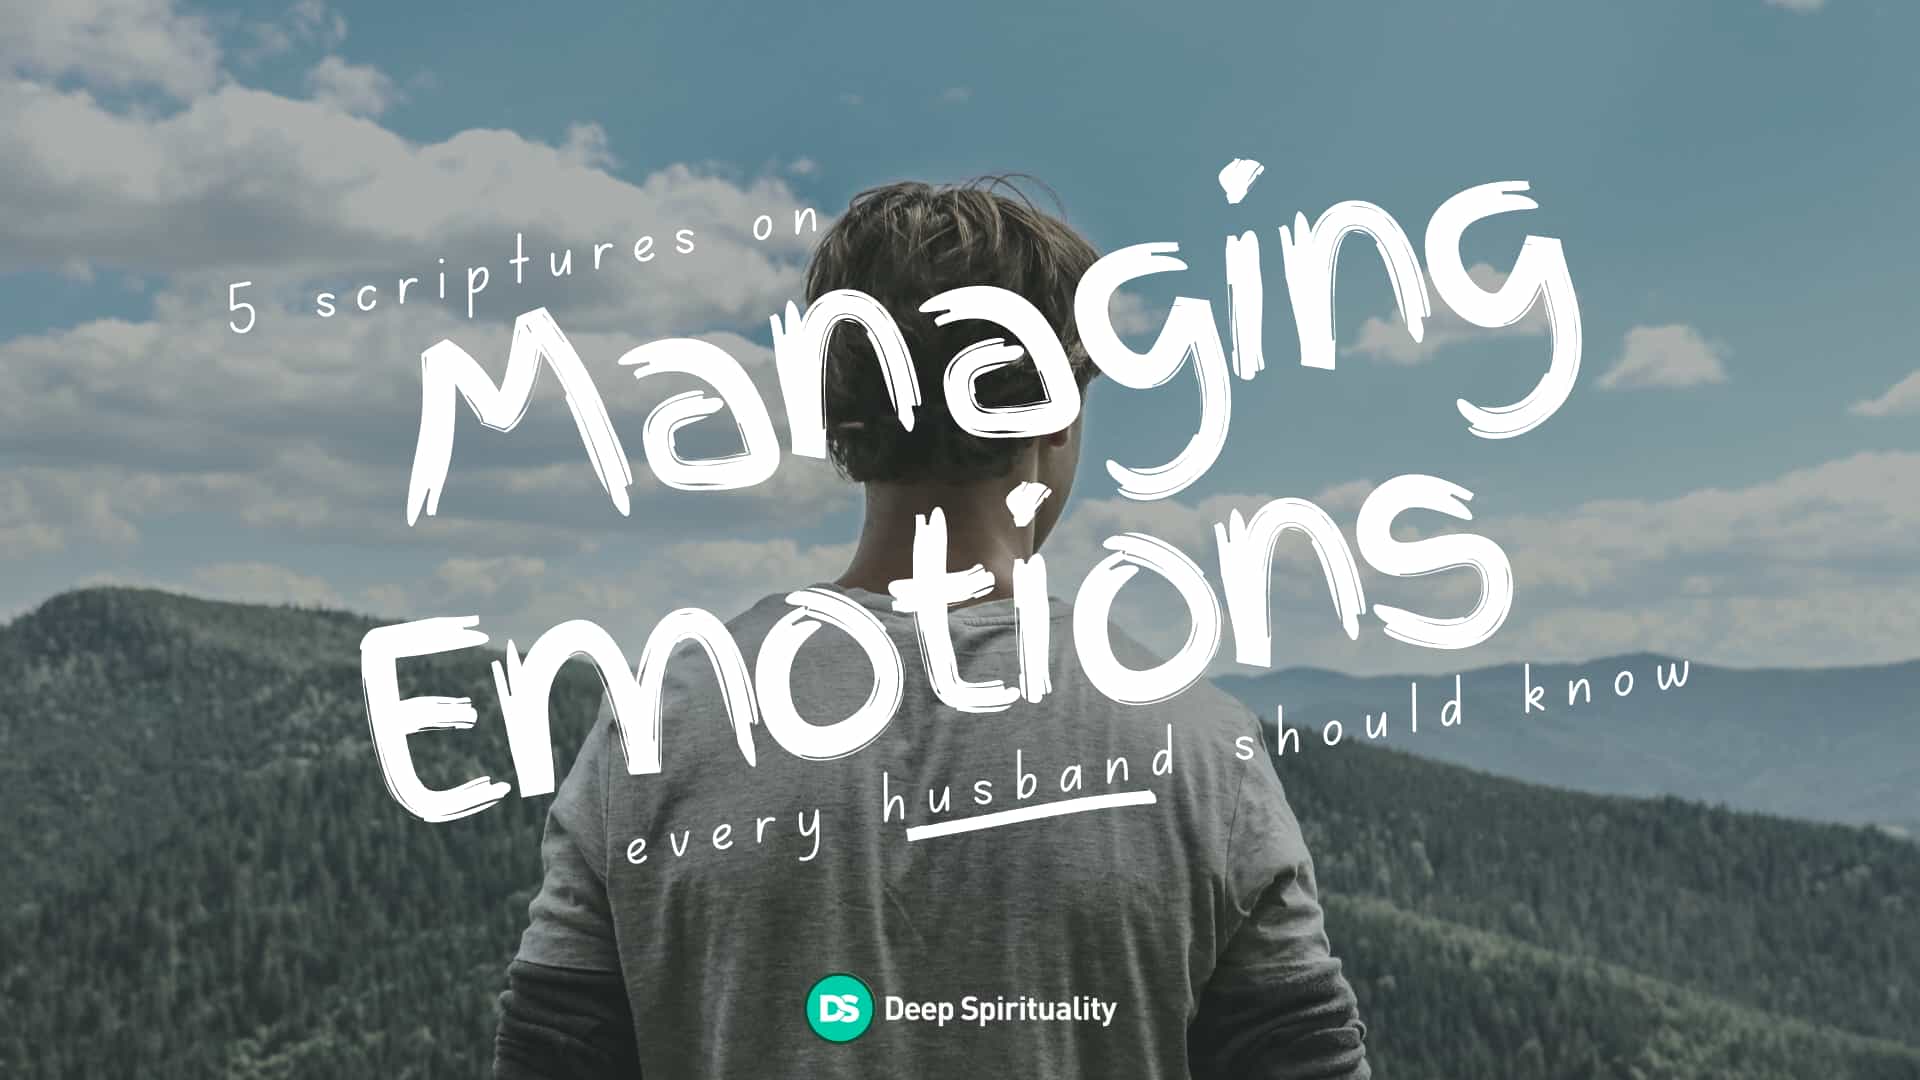 5 Scriptures on Managing Emotions Every Husband Should Know 1